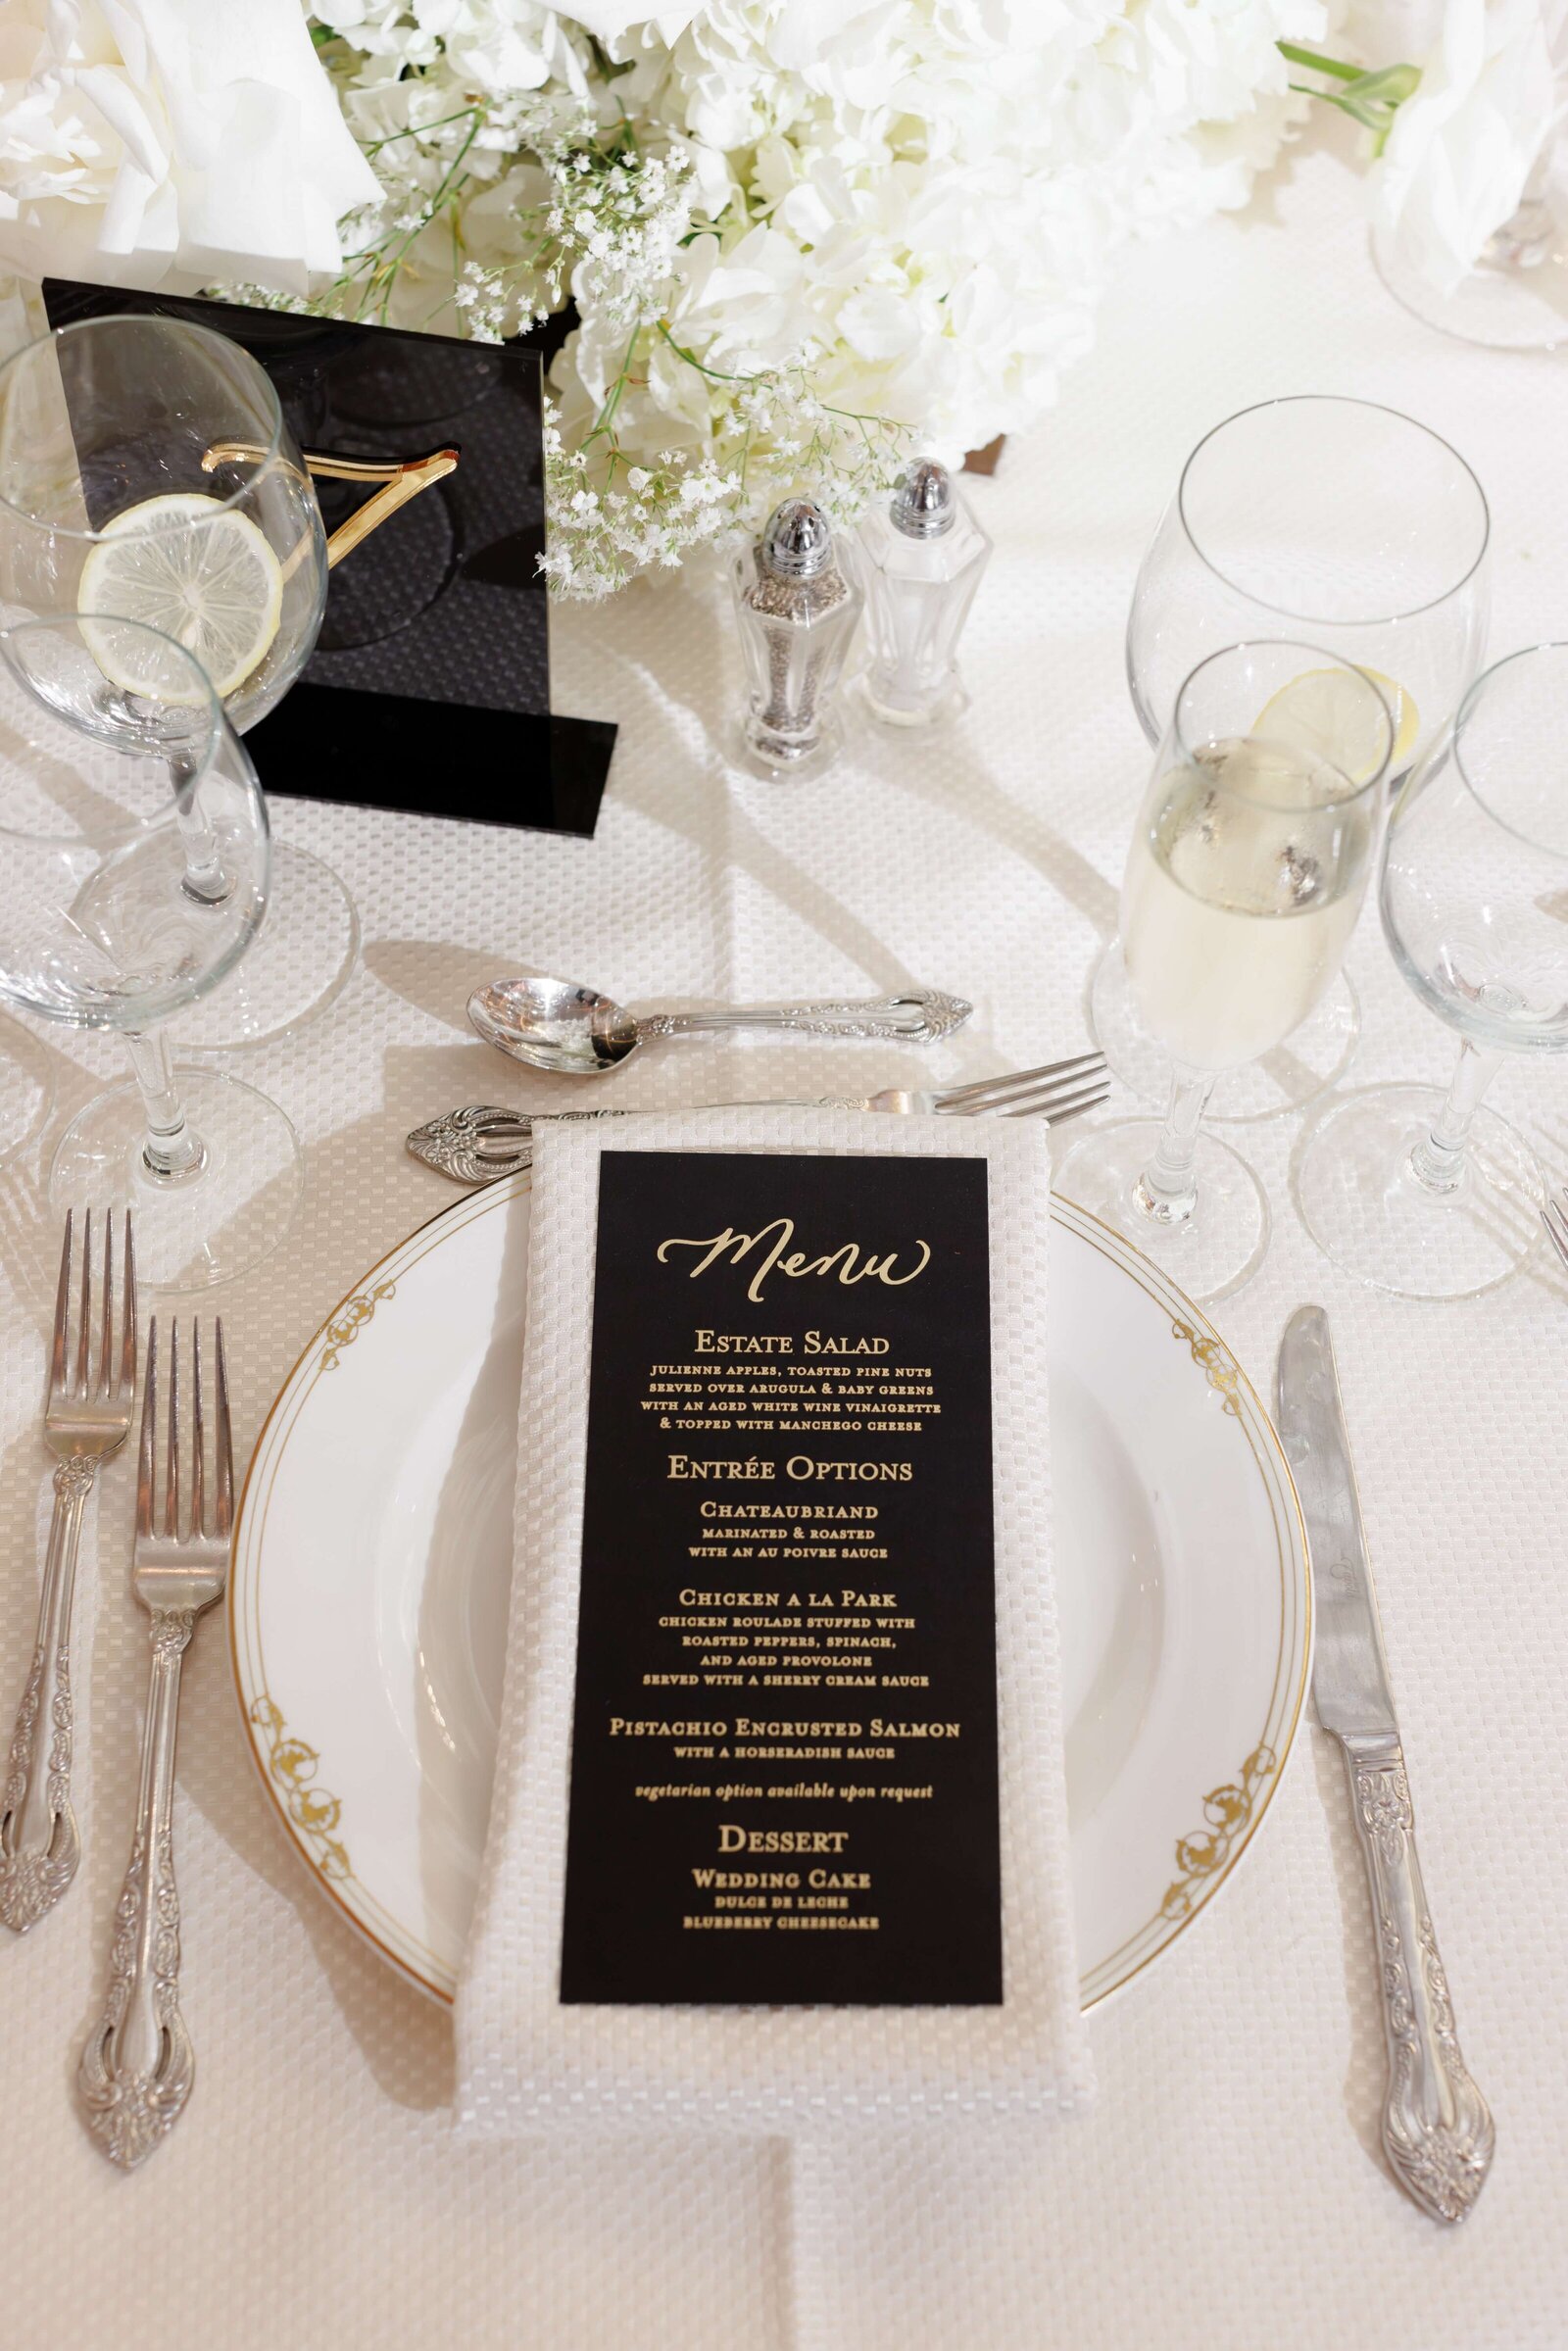 SGH Creative Luxury Wedding Signage & Stationery in New York & New Jersey - Full Gallery (122)